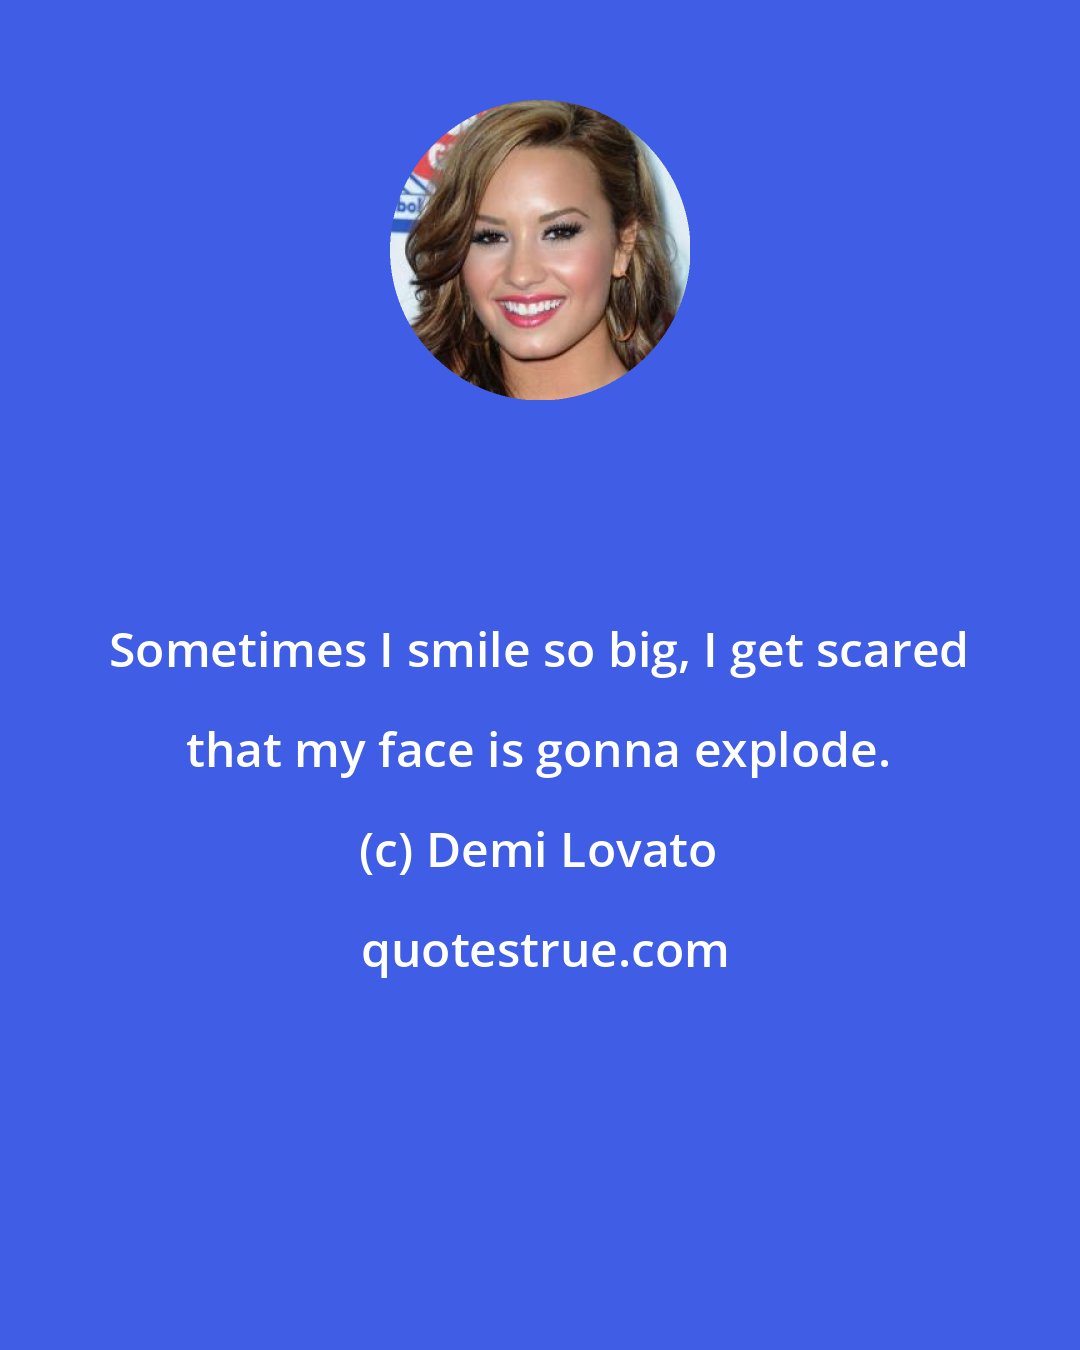 Demi Lovato: Sometimes I smile so big, I get scared that my face is gonna explode.